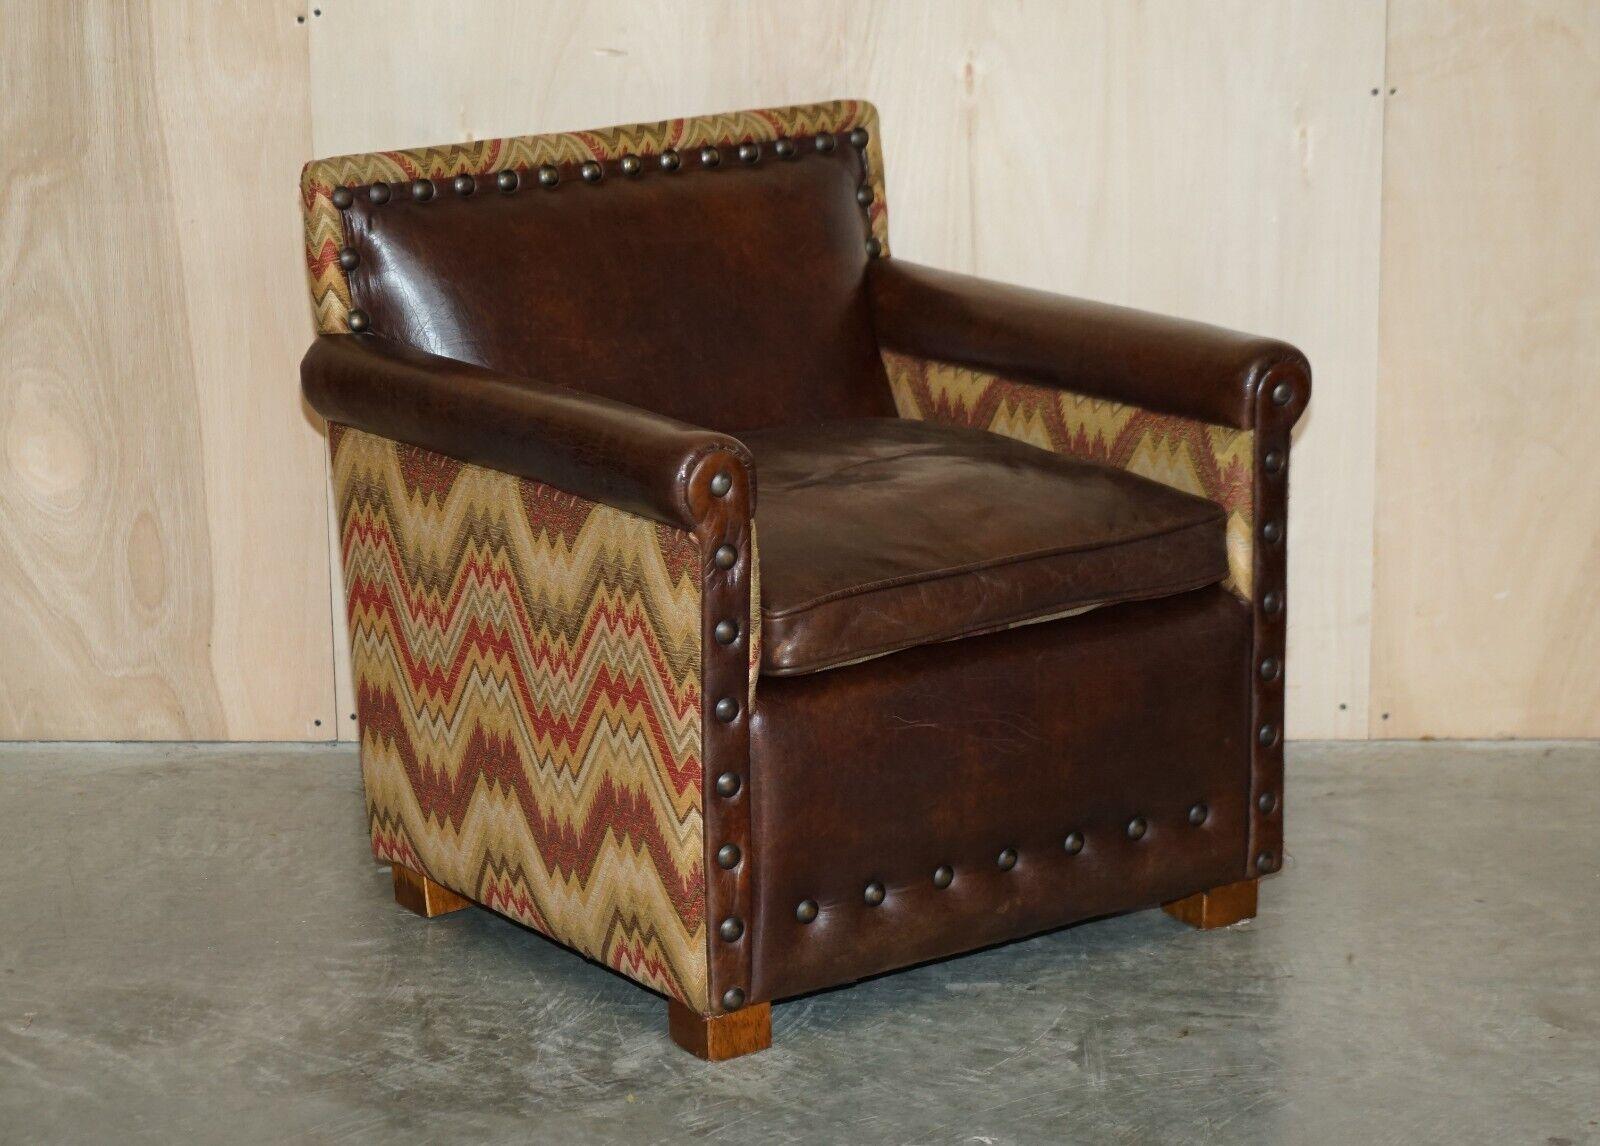 Royal House Antiques

Royal House Antiques is delighted to offer for sale this lovely pair of Andrew Martin Heritage brown leather and Kilim upholstered Marlborough armchairs   

Please note the delivery fee listed is just a guide, it covers within